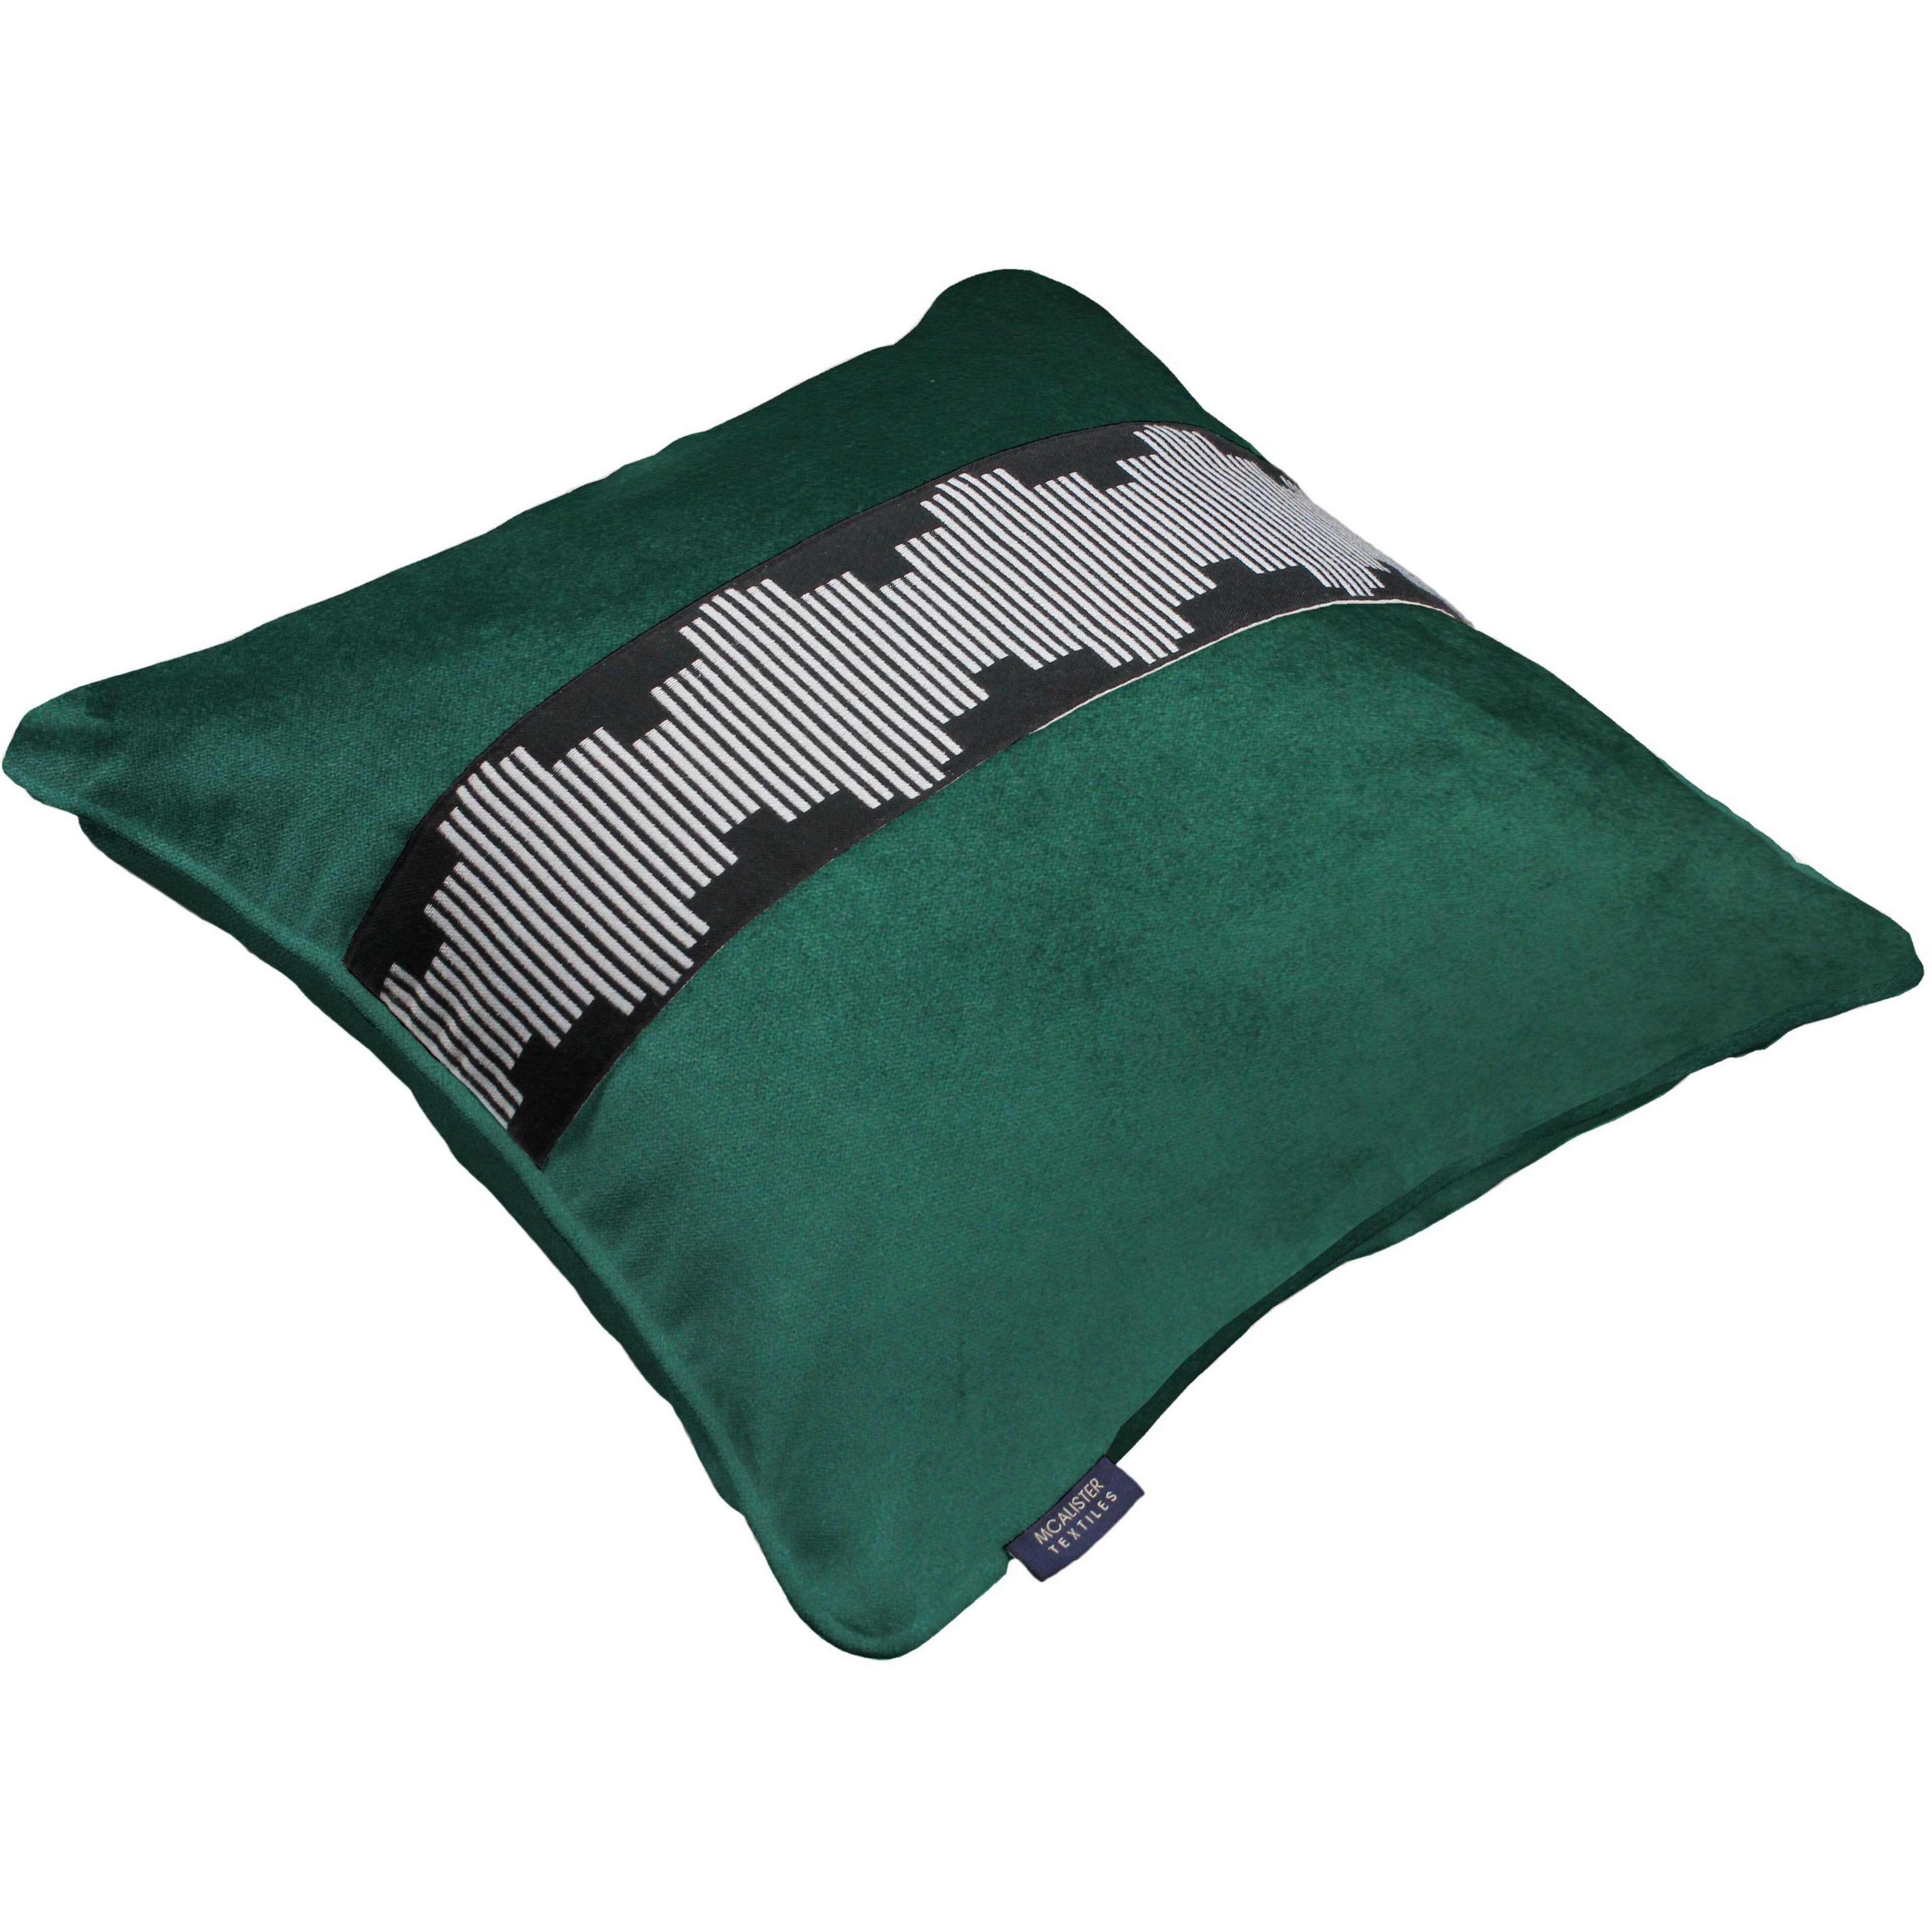 McAlister Textiles Maya Striped Emerald Green Velvet Cushion Cushions and Covers 